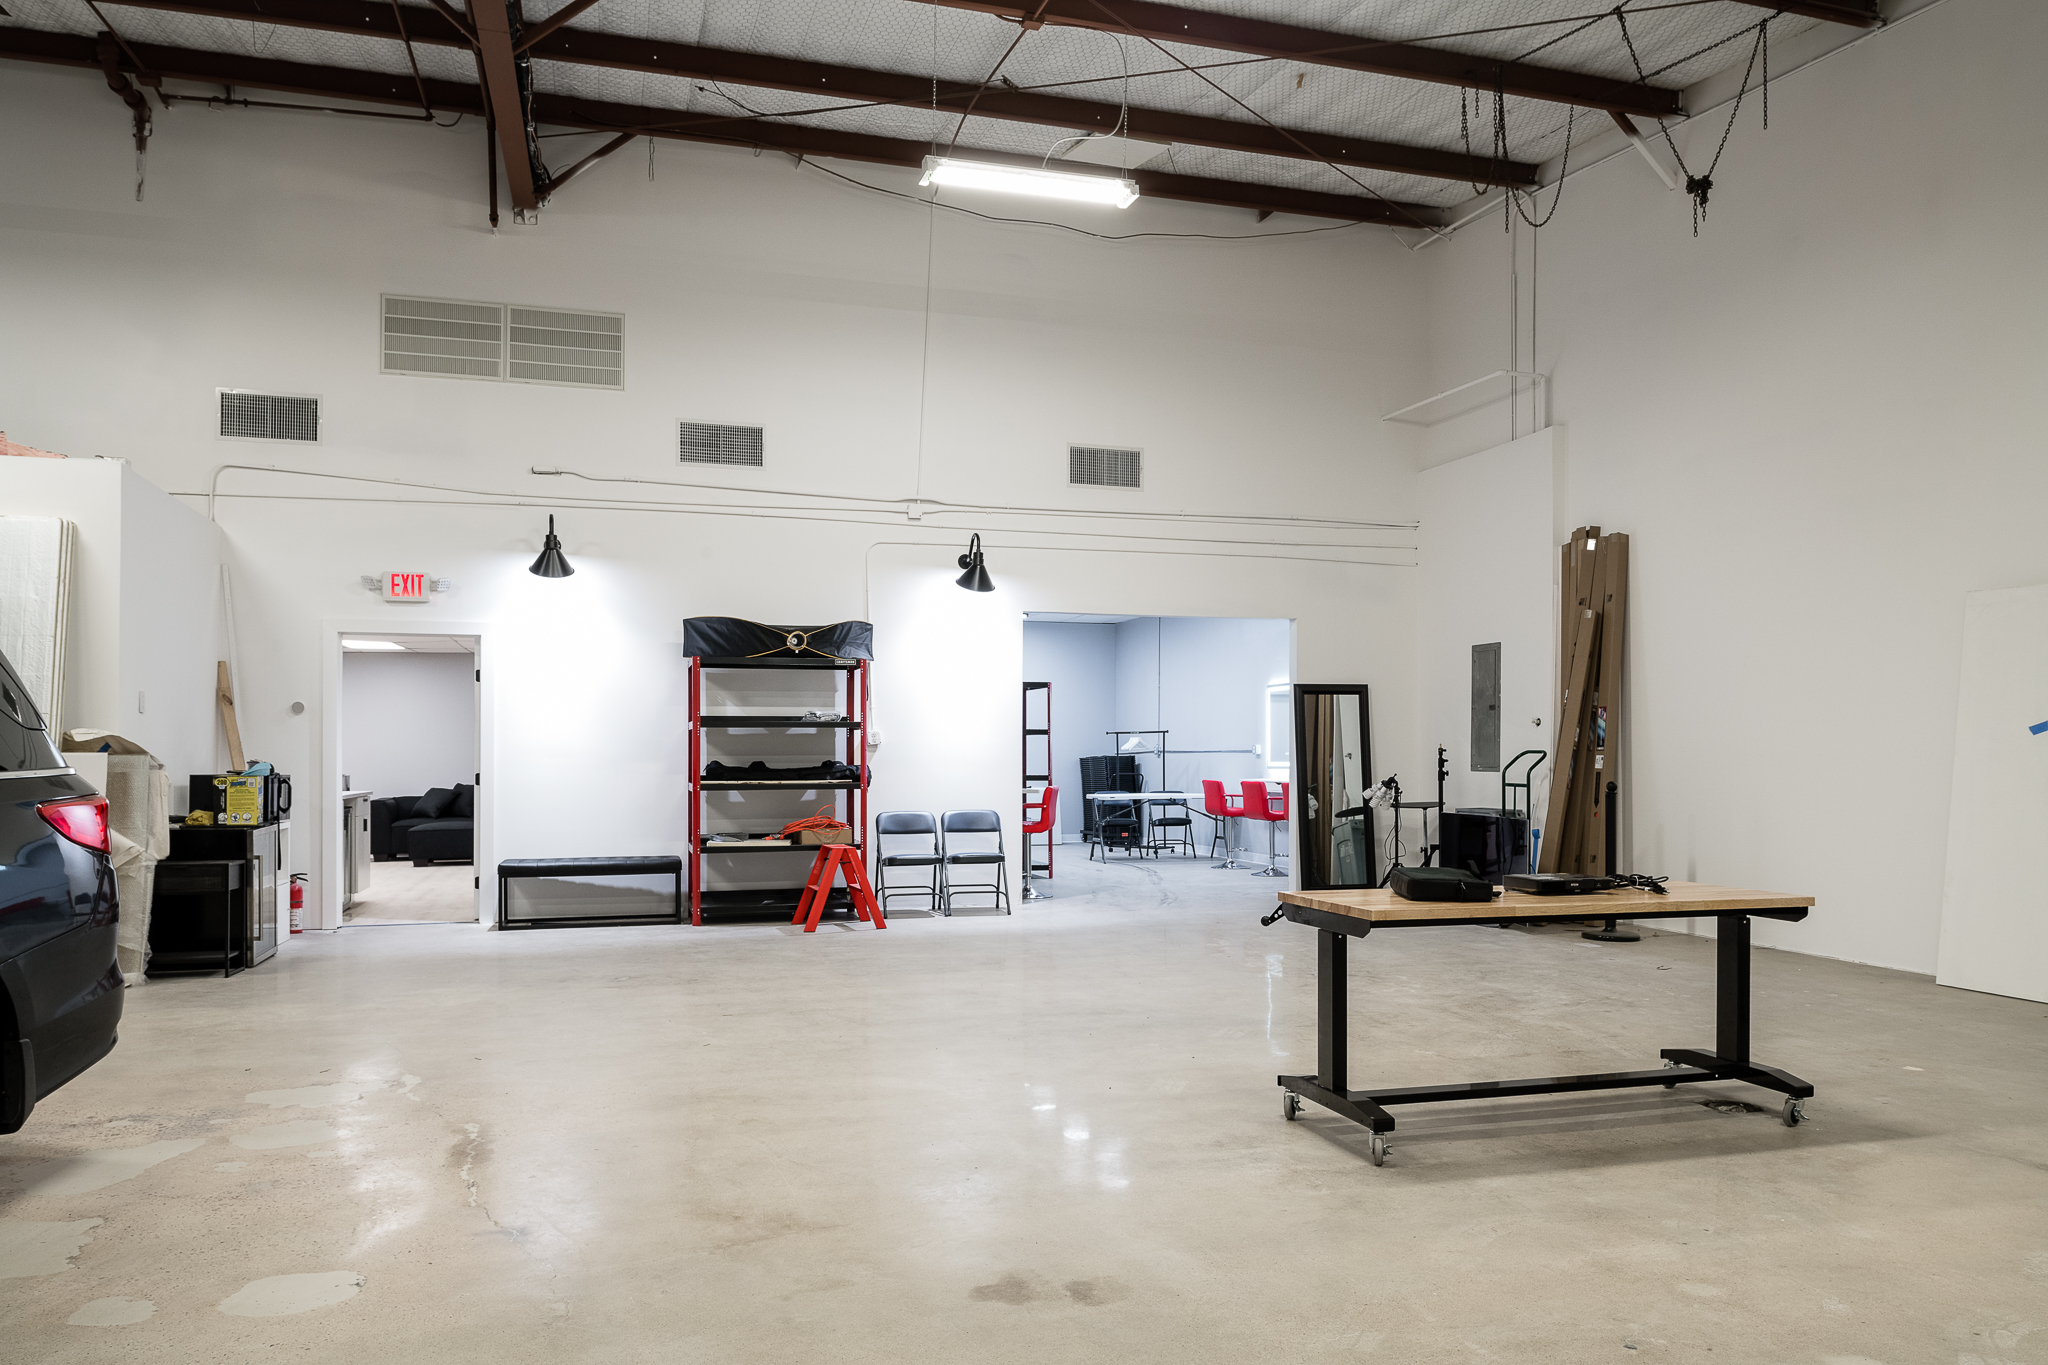 Rental Studio with high ceilings, garage access, and 2000 sq ft of space